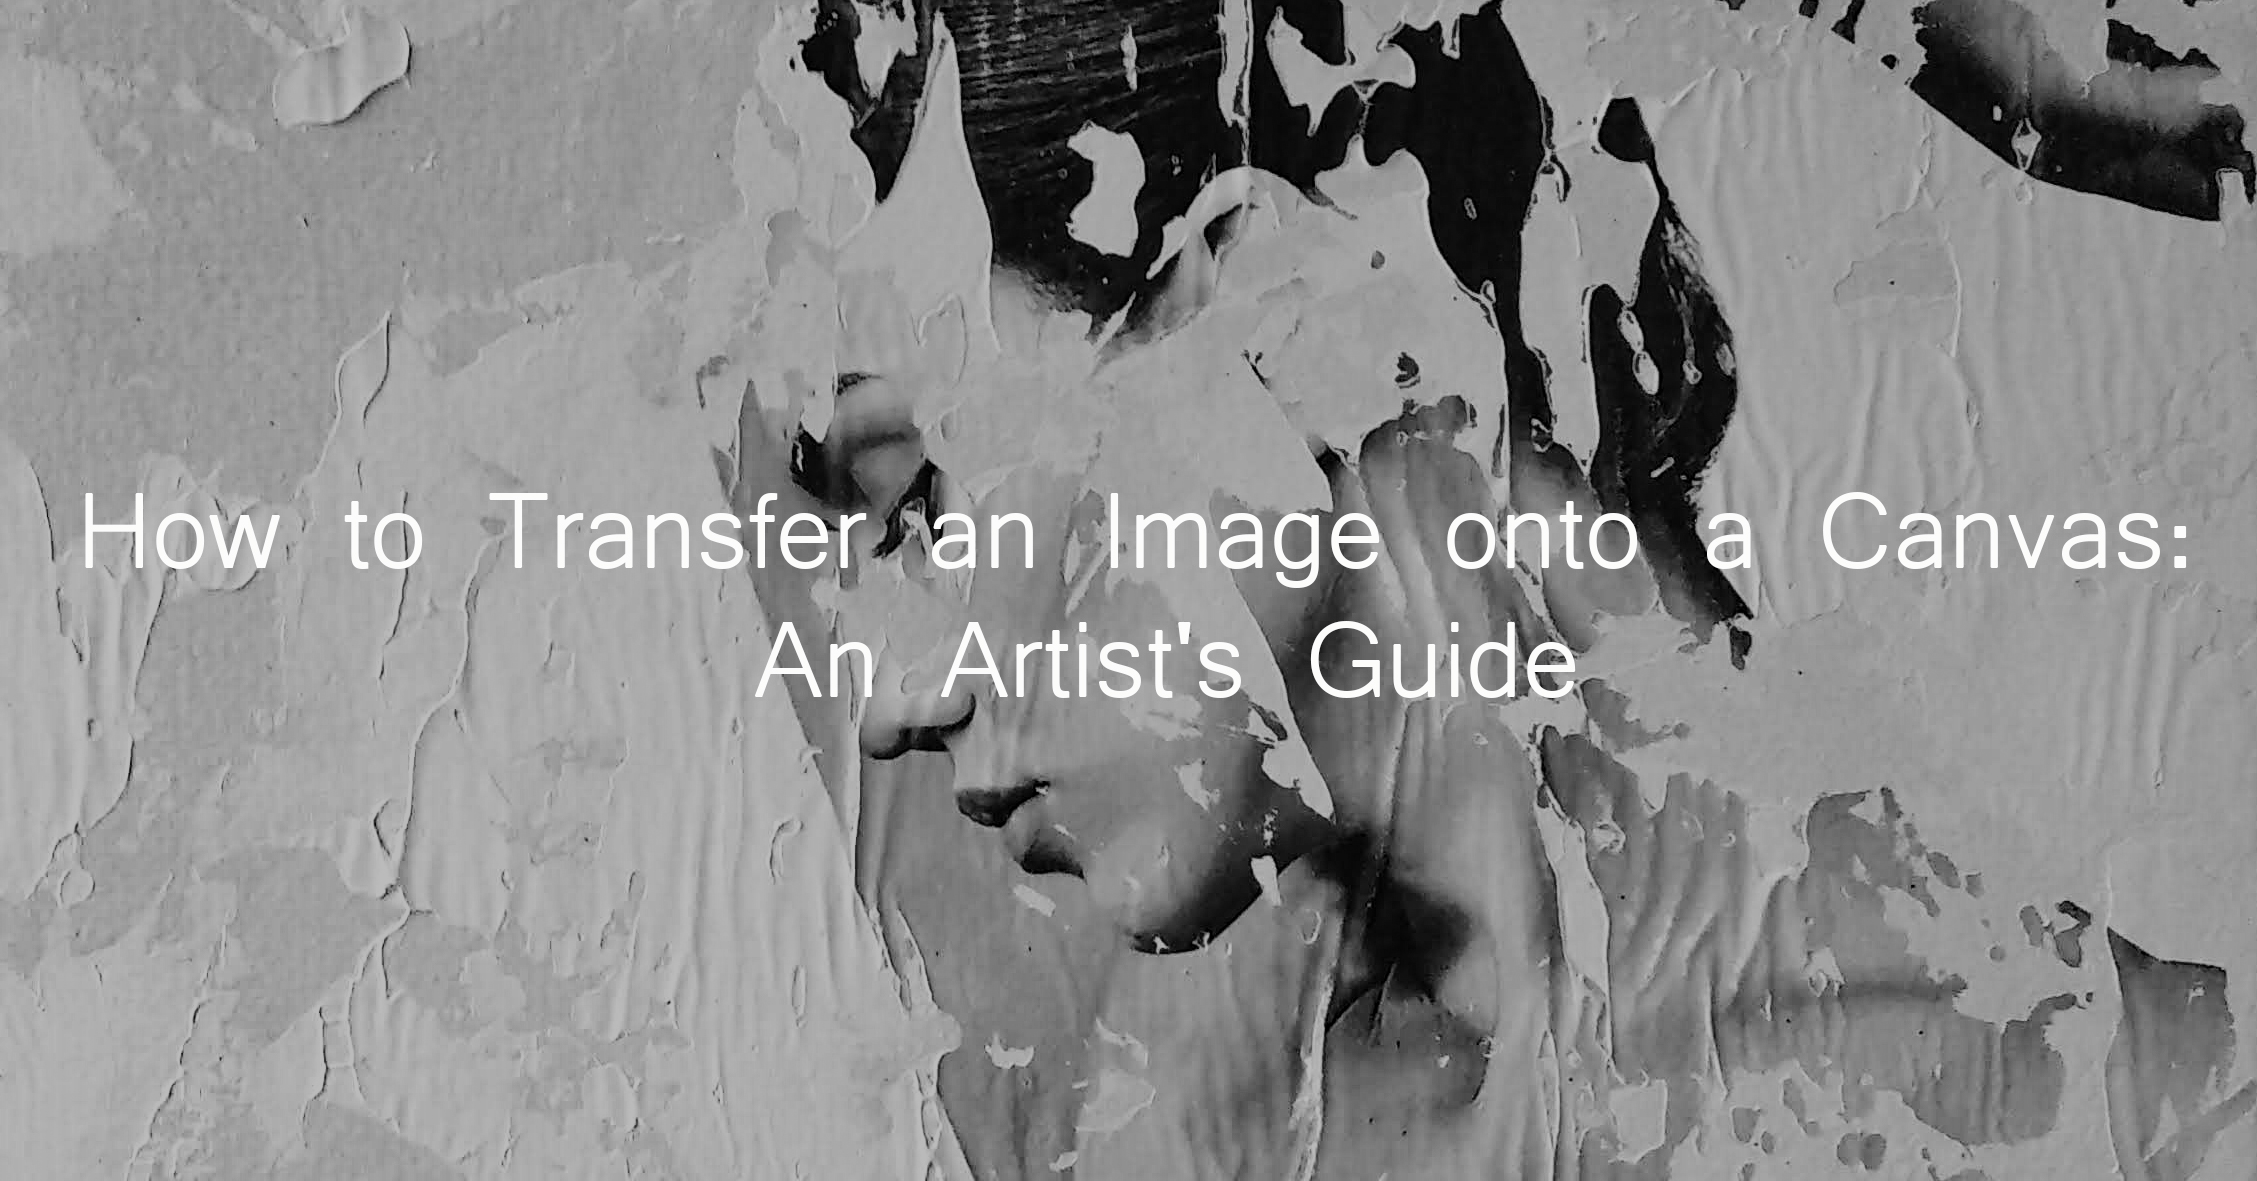 How to Transfer an Image onto a Canvas: An Artist's Guide with text